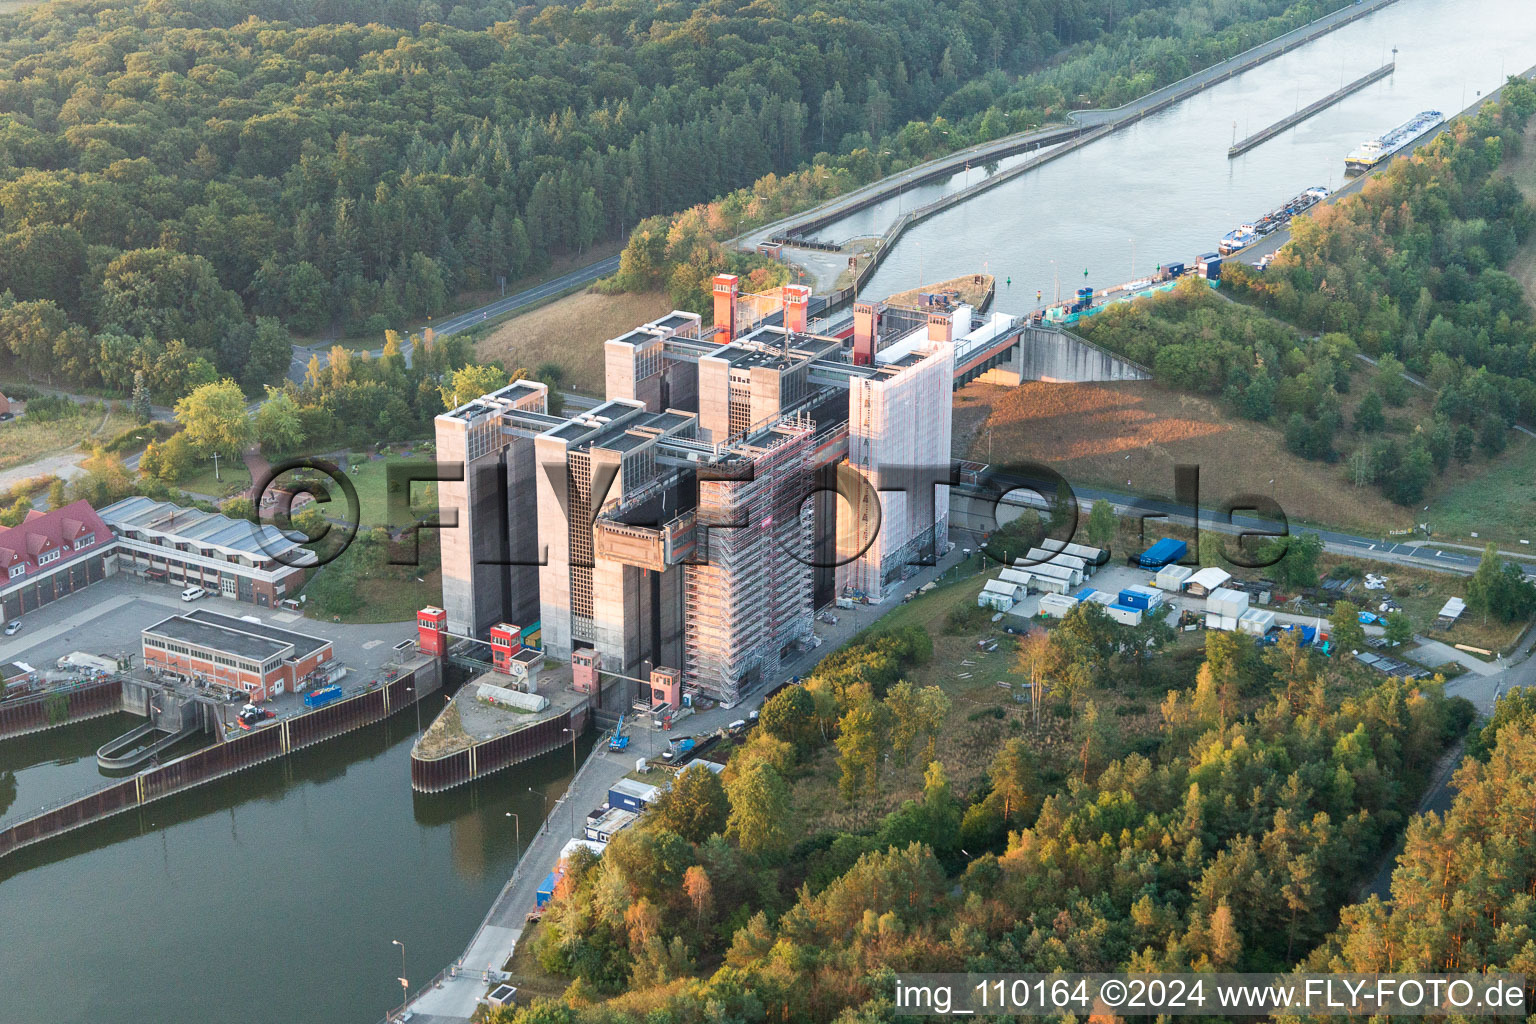 Boat lift and locks plants on the banks of the waterway of the Elbe side channel in Scharnebeck in the state Lower Saxony, Germany from the plane